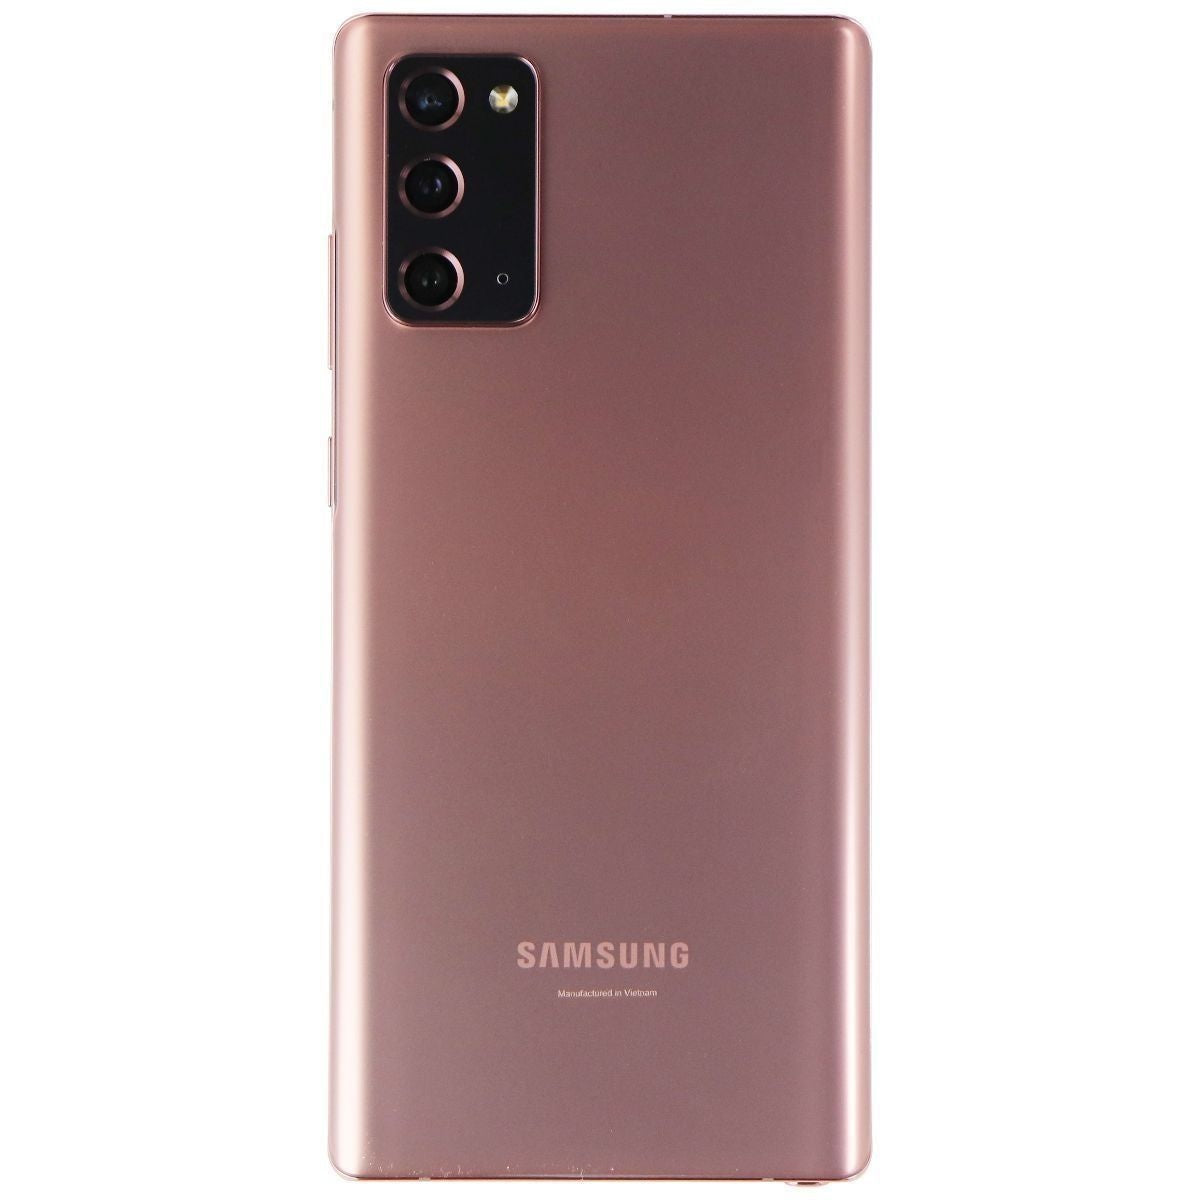 Samsung Galaxy Note20 5G (6.7-inch) (SM-N981U) AT&T Only - 128GB/Mystic Bronze Cell Phones & Smartphones Samsung    - Simple Cell Bulk Wholesale Pricing - USA Seller